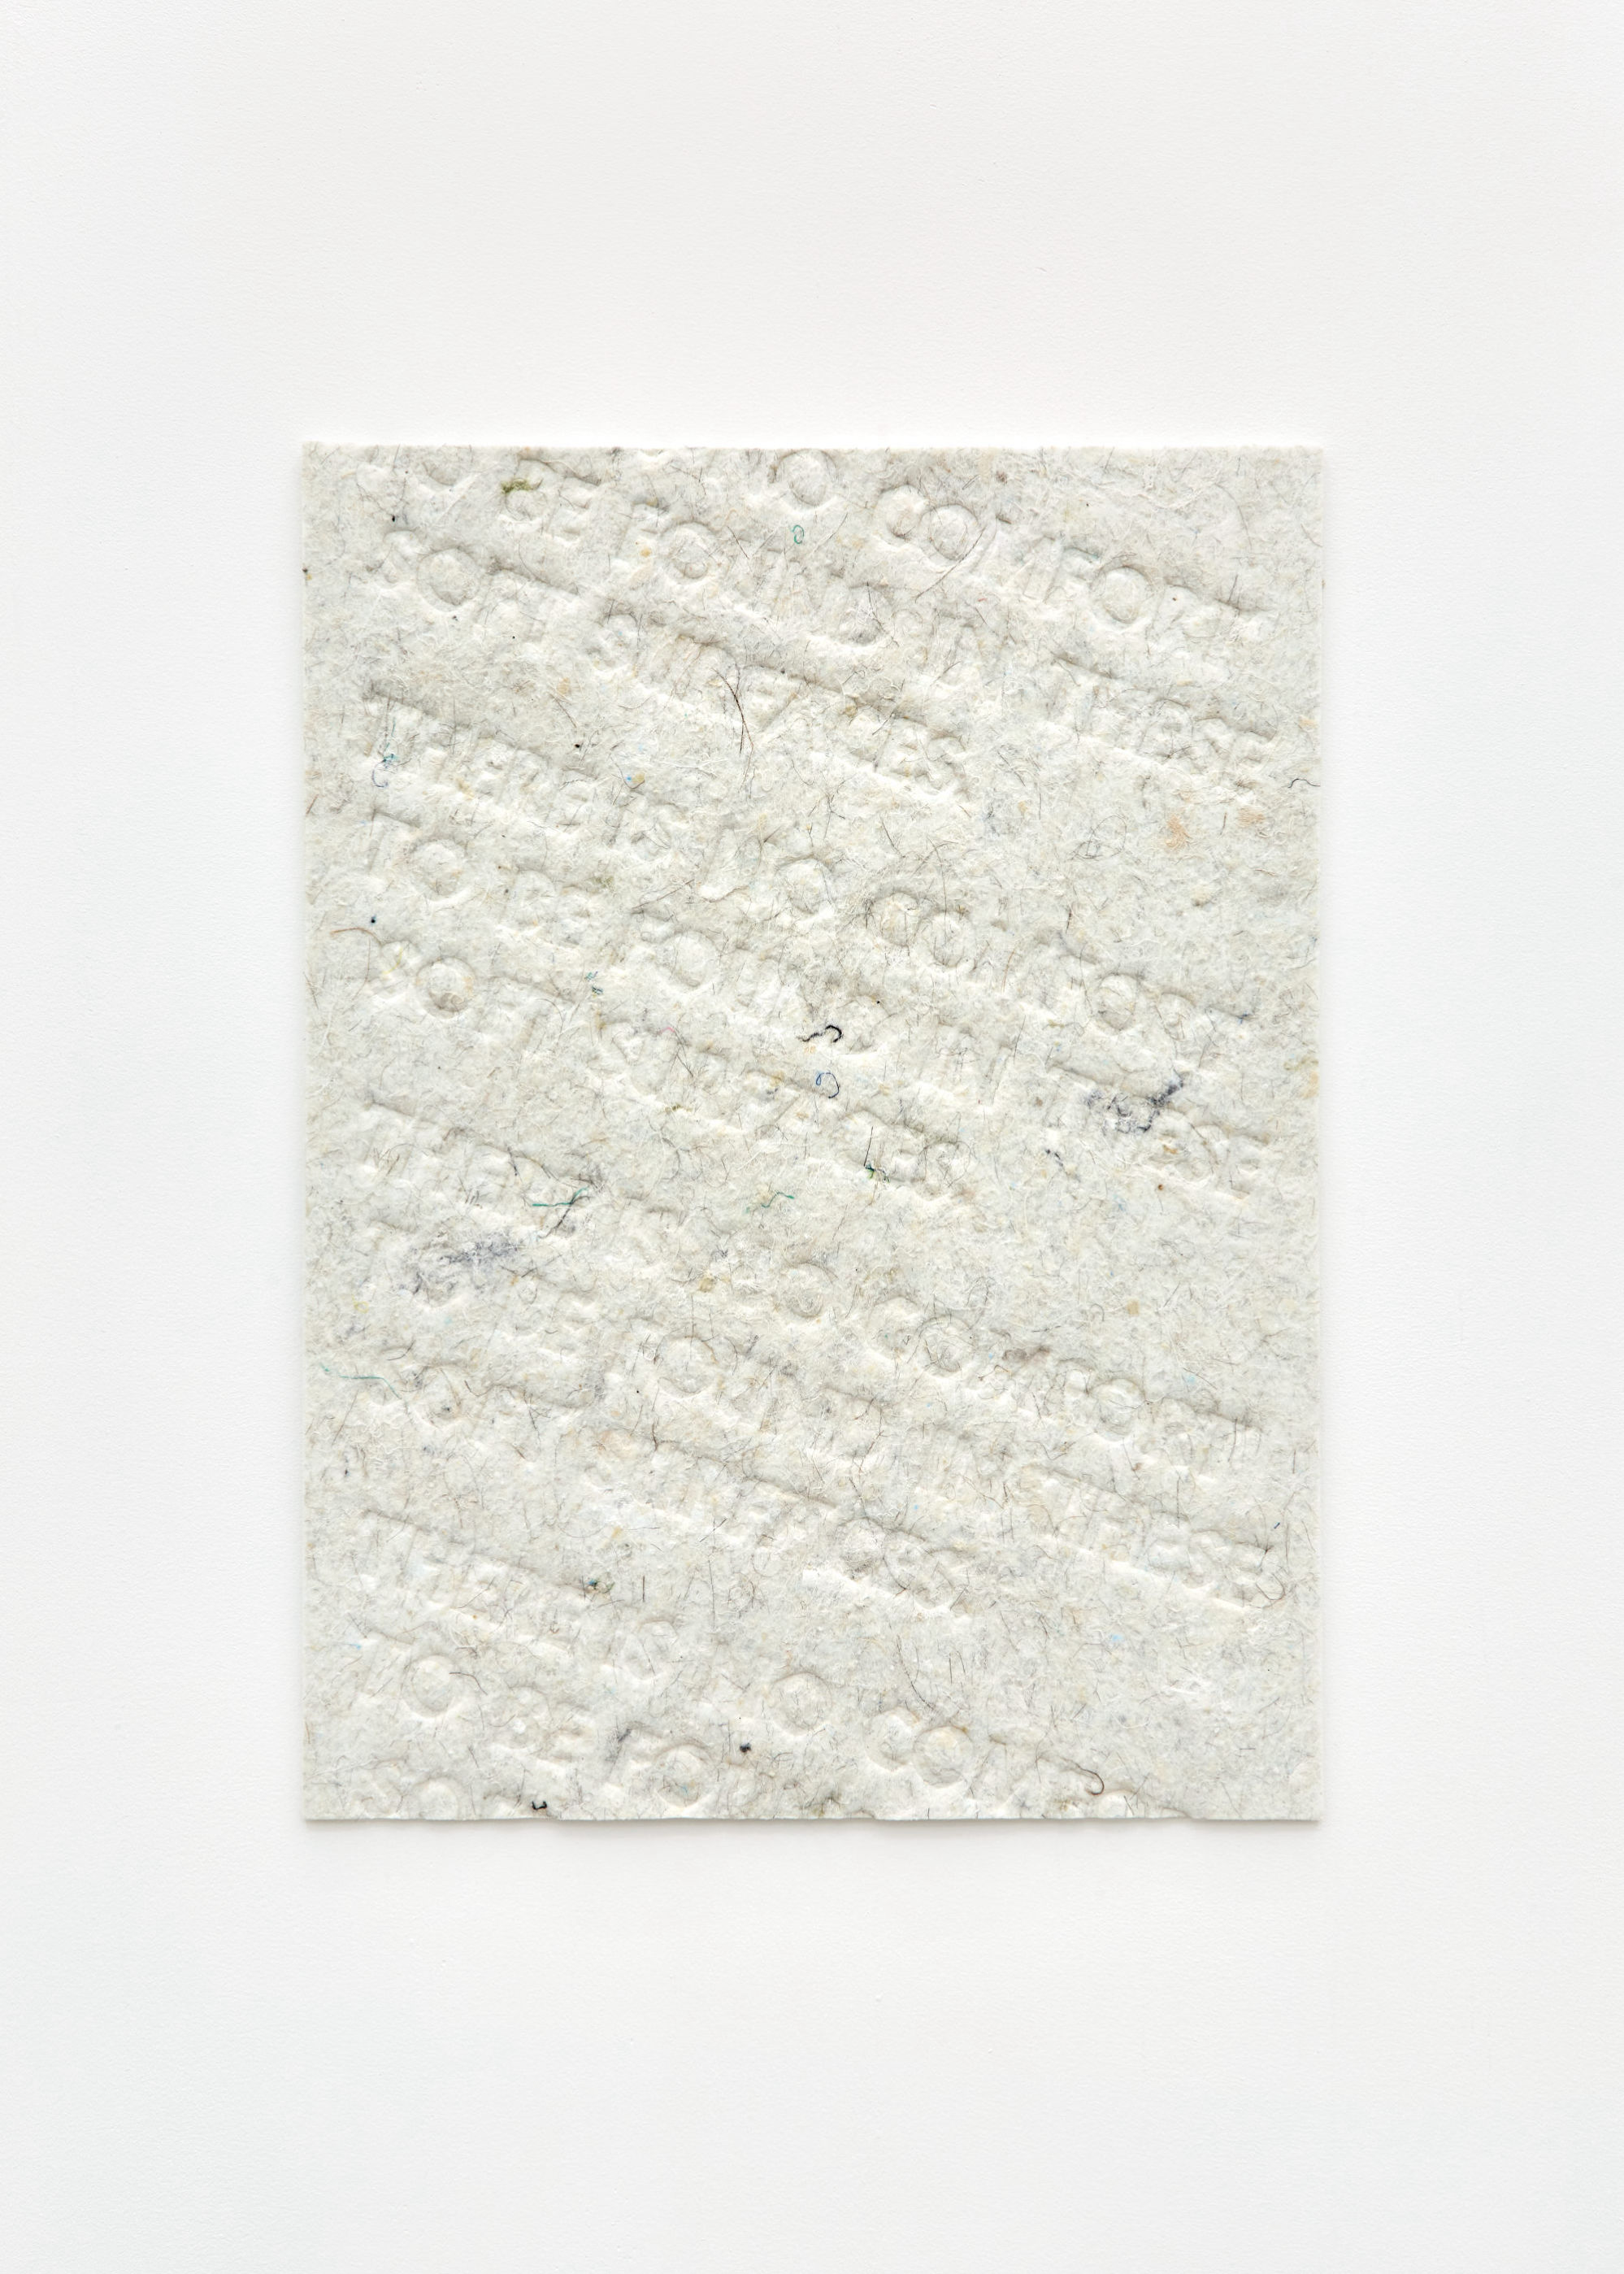 James Fuller - There Is No Comfort To Be Found In These Soft Surfaces 2021 -  THERE IS NO COMFORT TO BE FOUND IN THESE SOFT SURFACES (2021) - Pressed mixed fibre spring mattress wadding, steel - 01